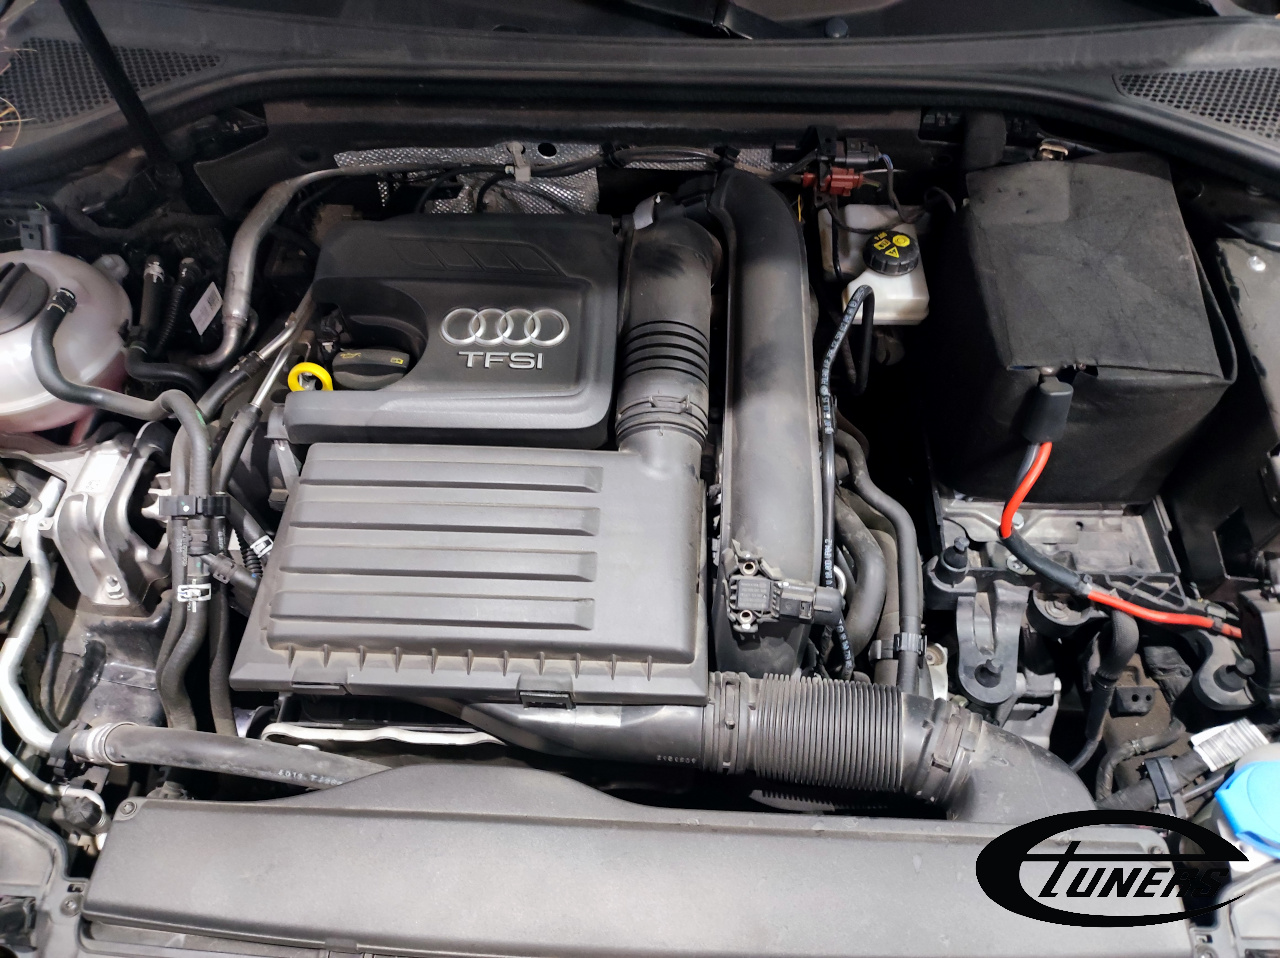 https://www.etuners.gr/wp-content/uploads/2022/02/Audi_A3_14TSI150_stage1_95ron_engine1.jpg